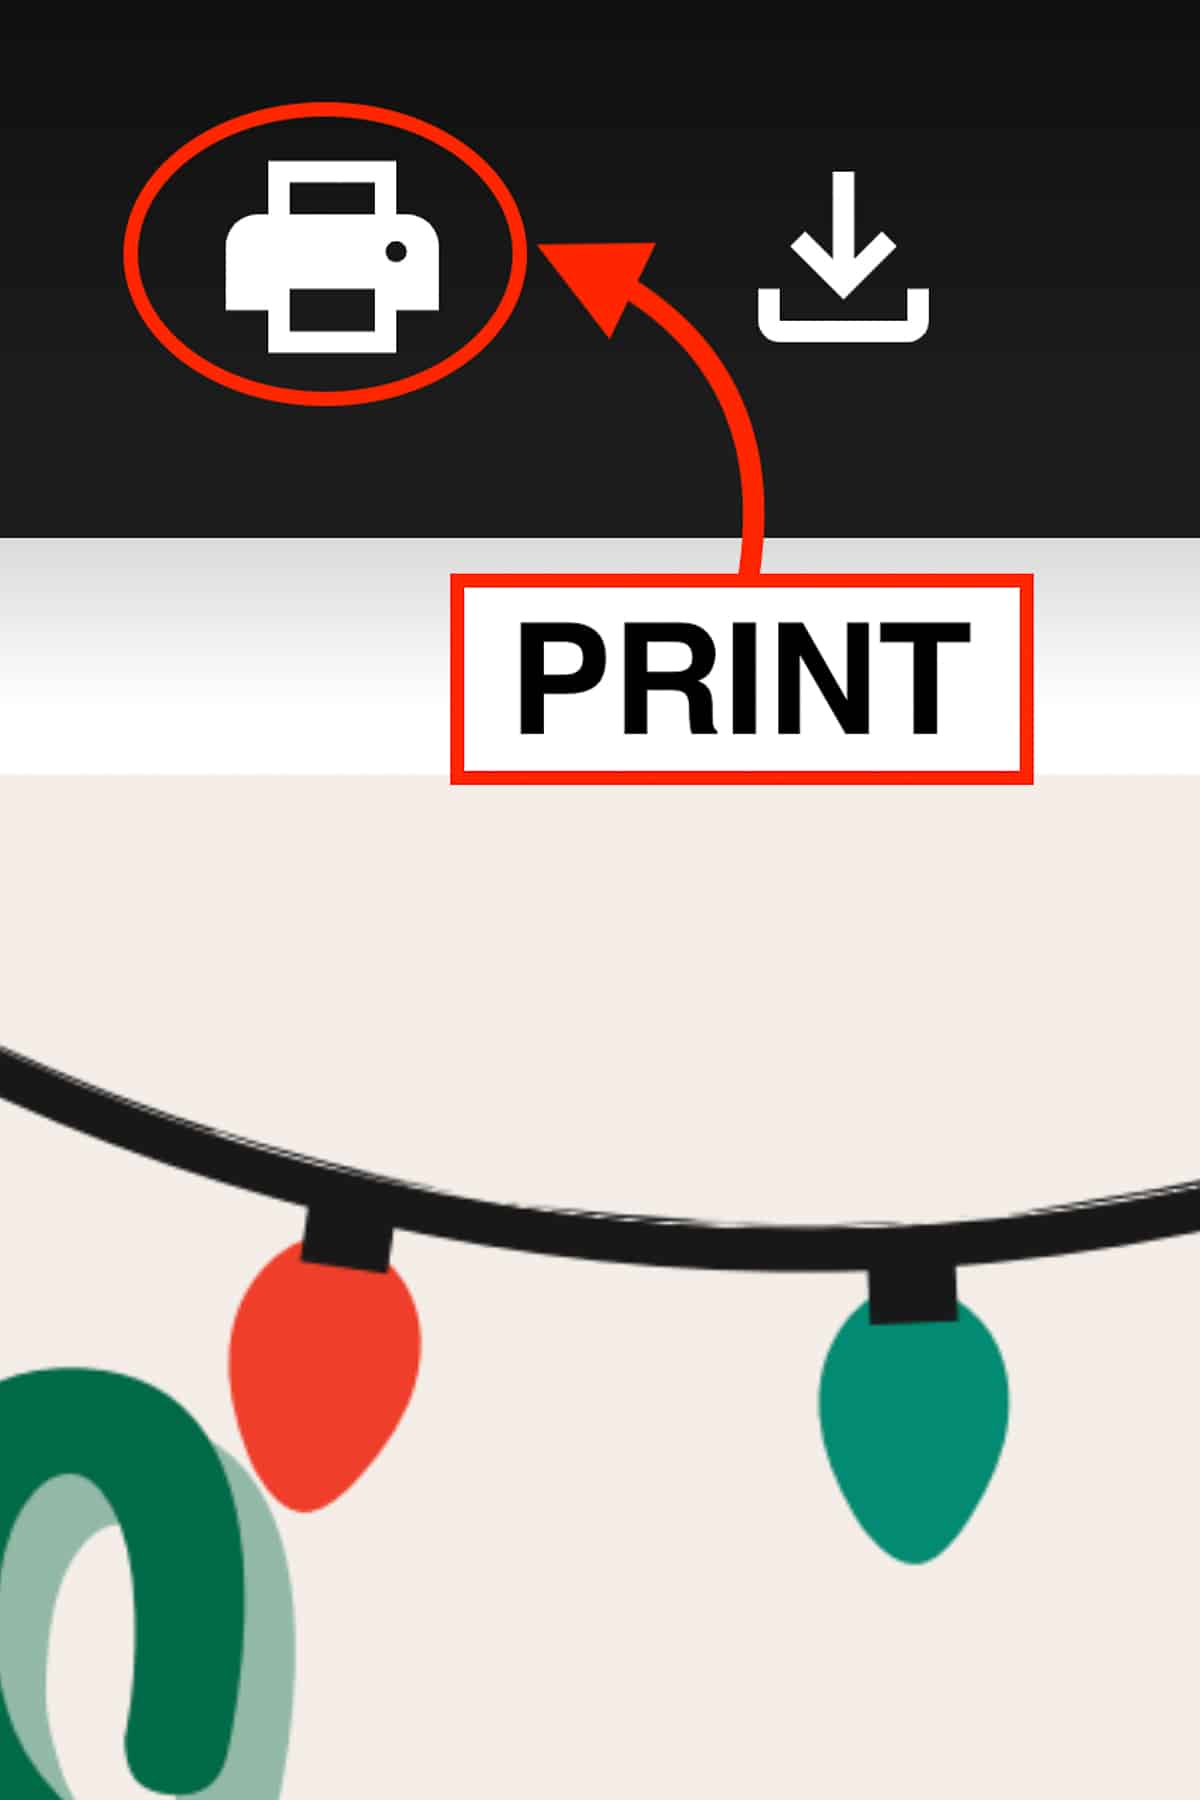 A print out of a Christmas This or That printable with download buttons with arrows pointing to the printer symbol.